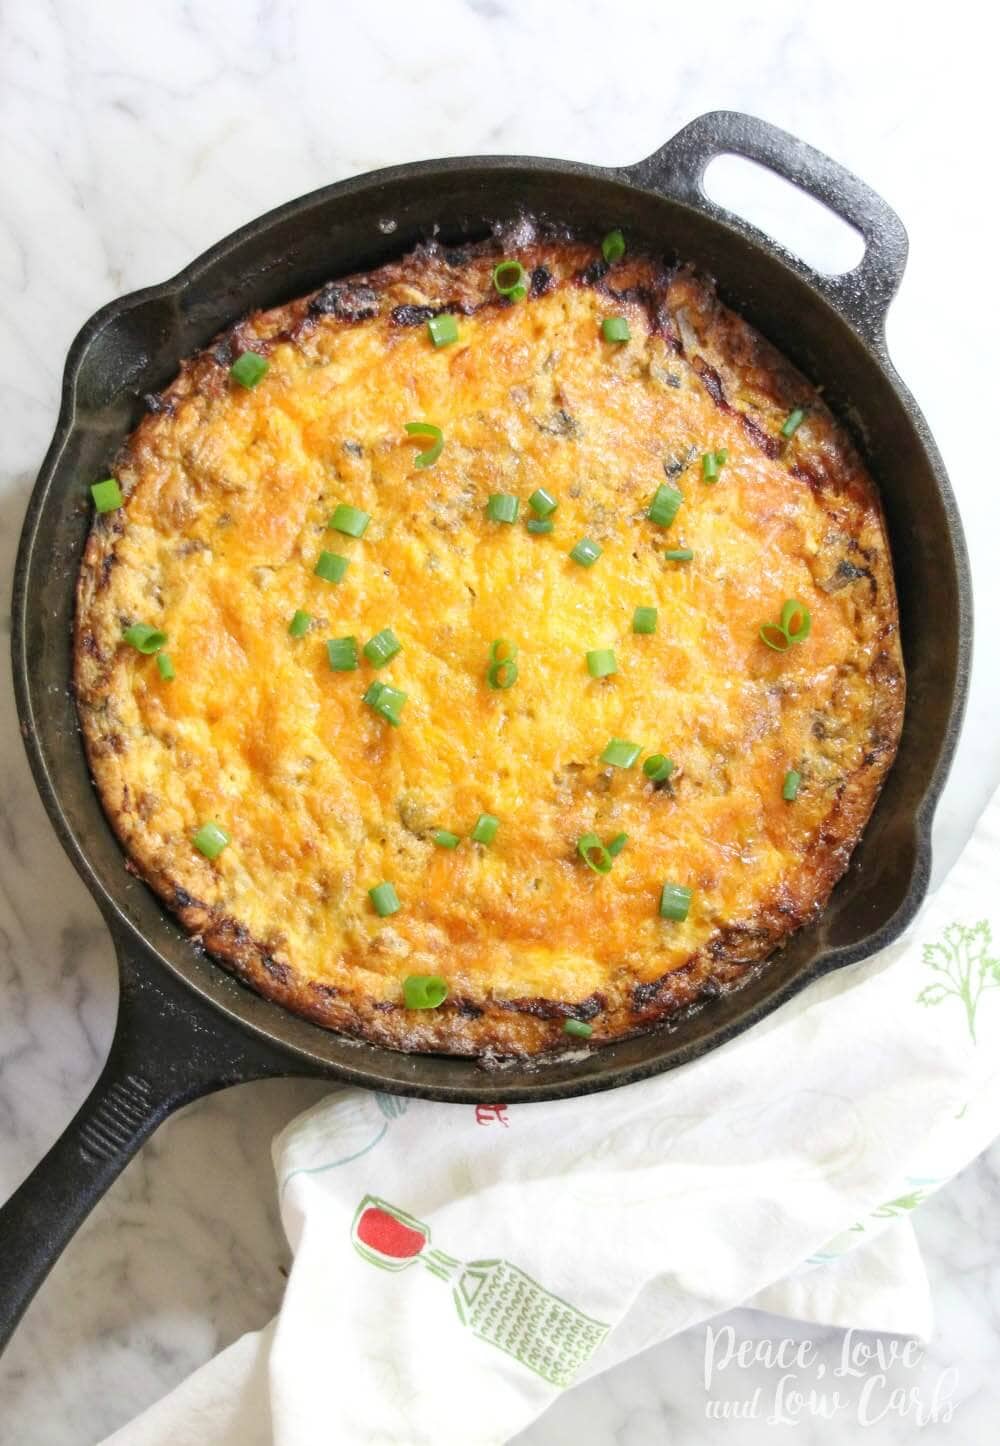 Keto Spicy Sausage and Caramelized Onion Breakfast Bake | Peace Love and Low Carb